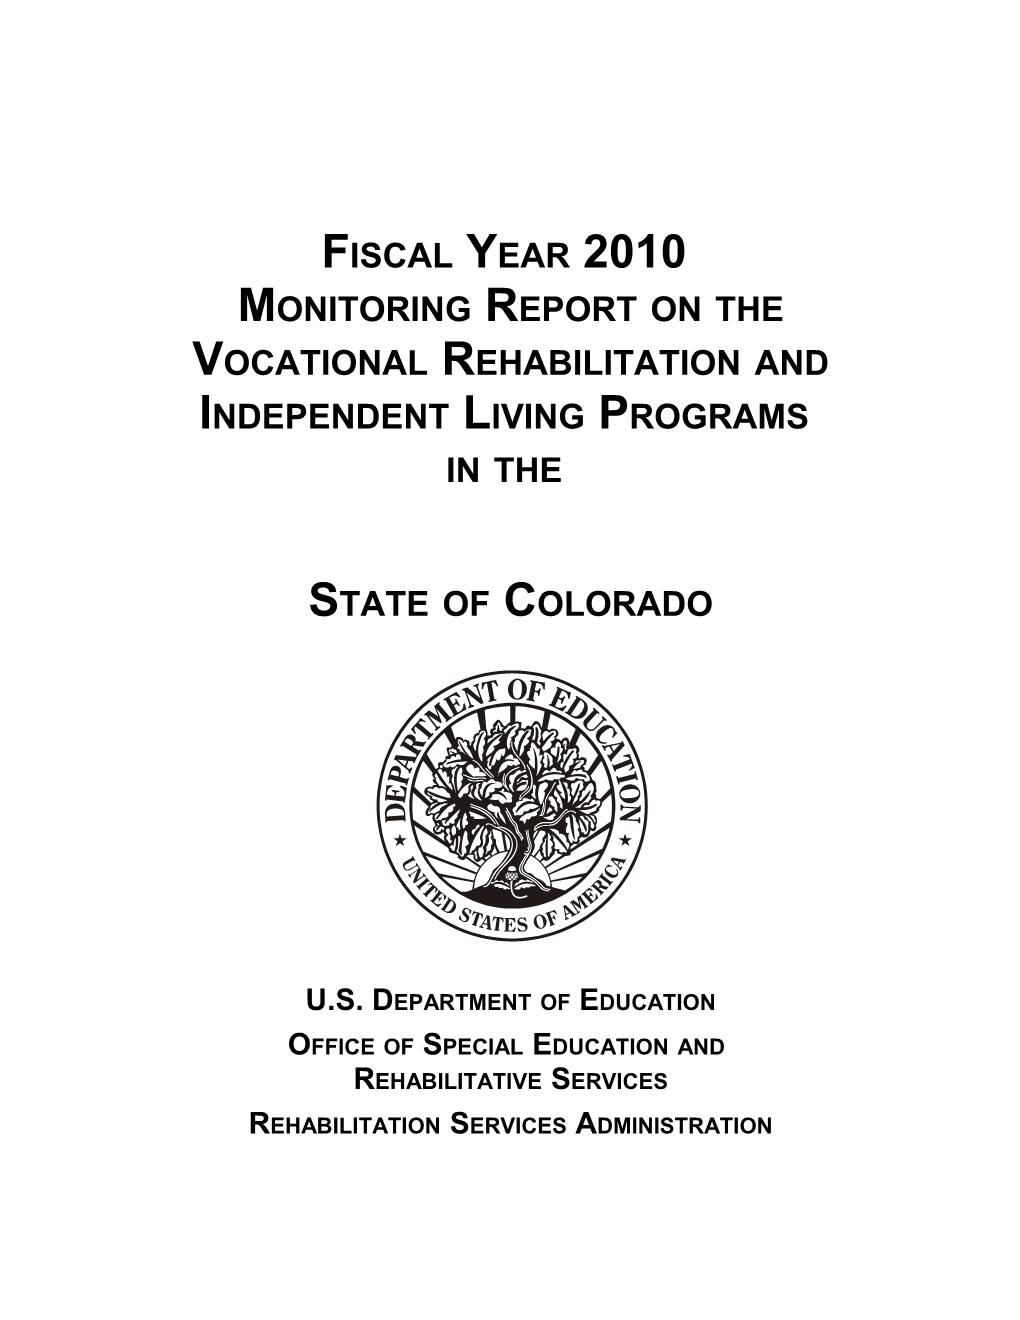 Fiscal Year 2010 Monitoring Report on the Vocational Rehabilitation and Independent Living